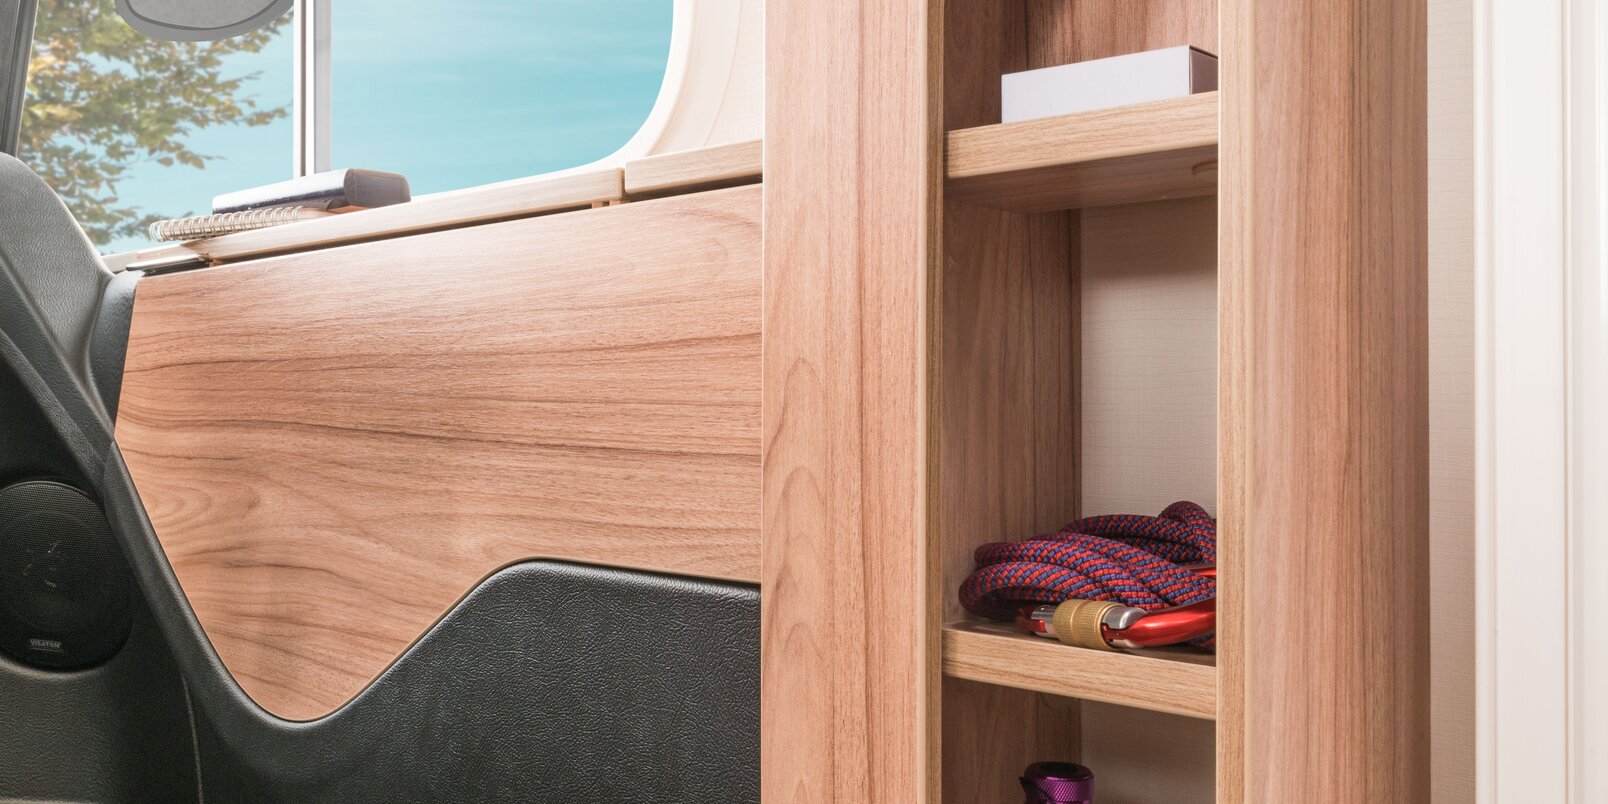 Shelf compartments in the entrance area of the HYMER Exsis-i motorhome for storing utensils